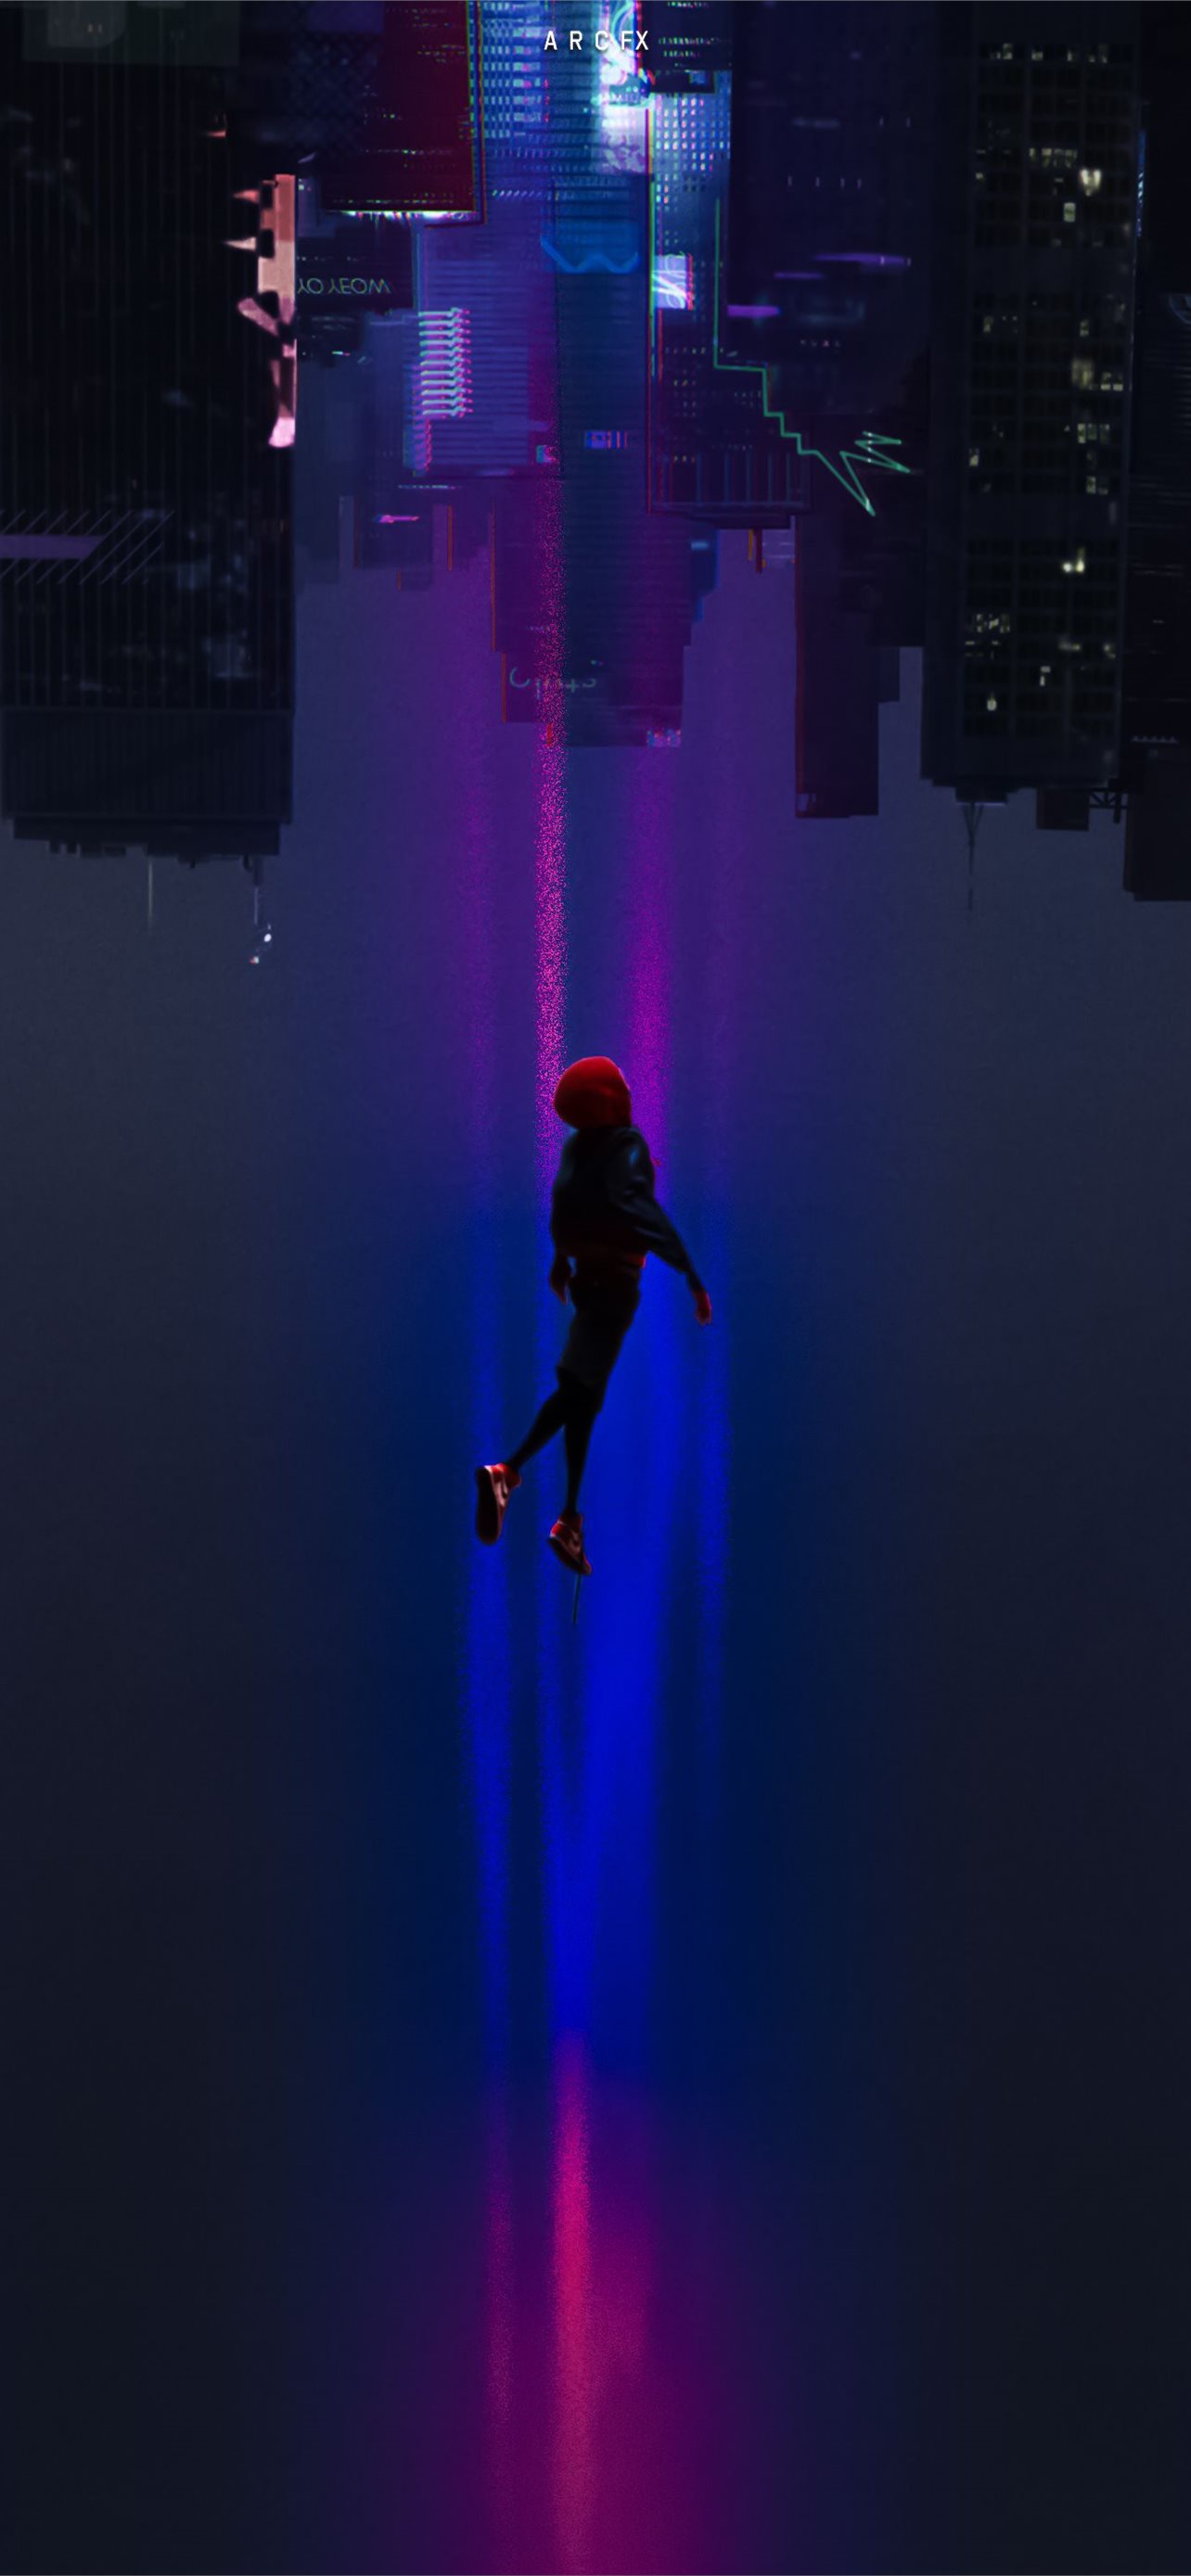 spider man into the spider verse iPhone Wallpaper Free Download